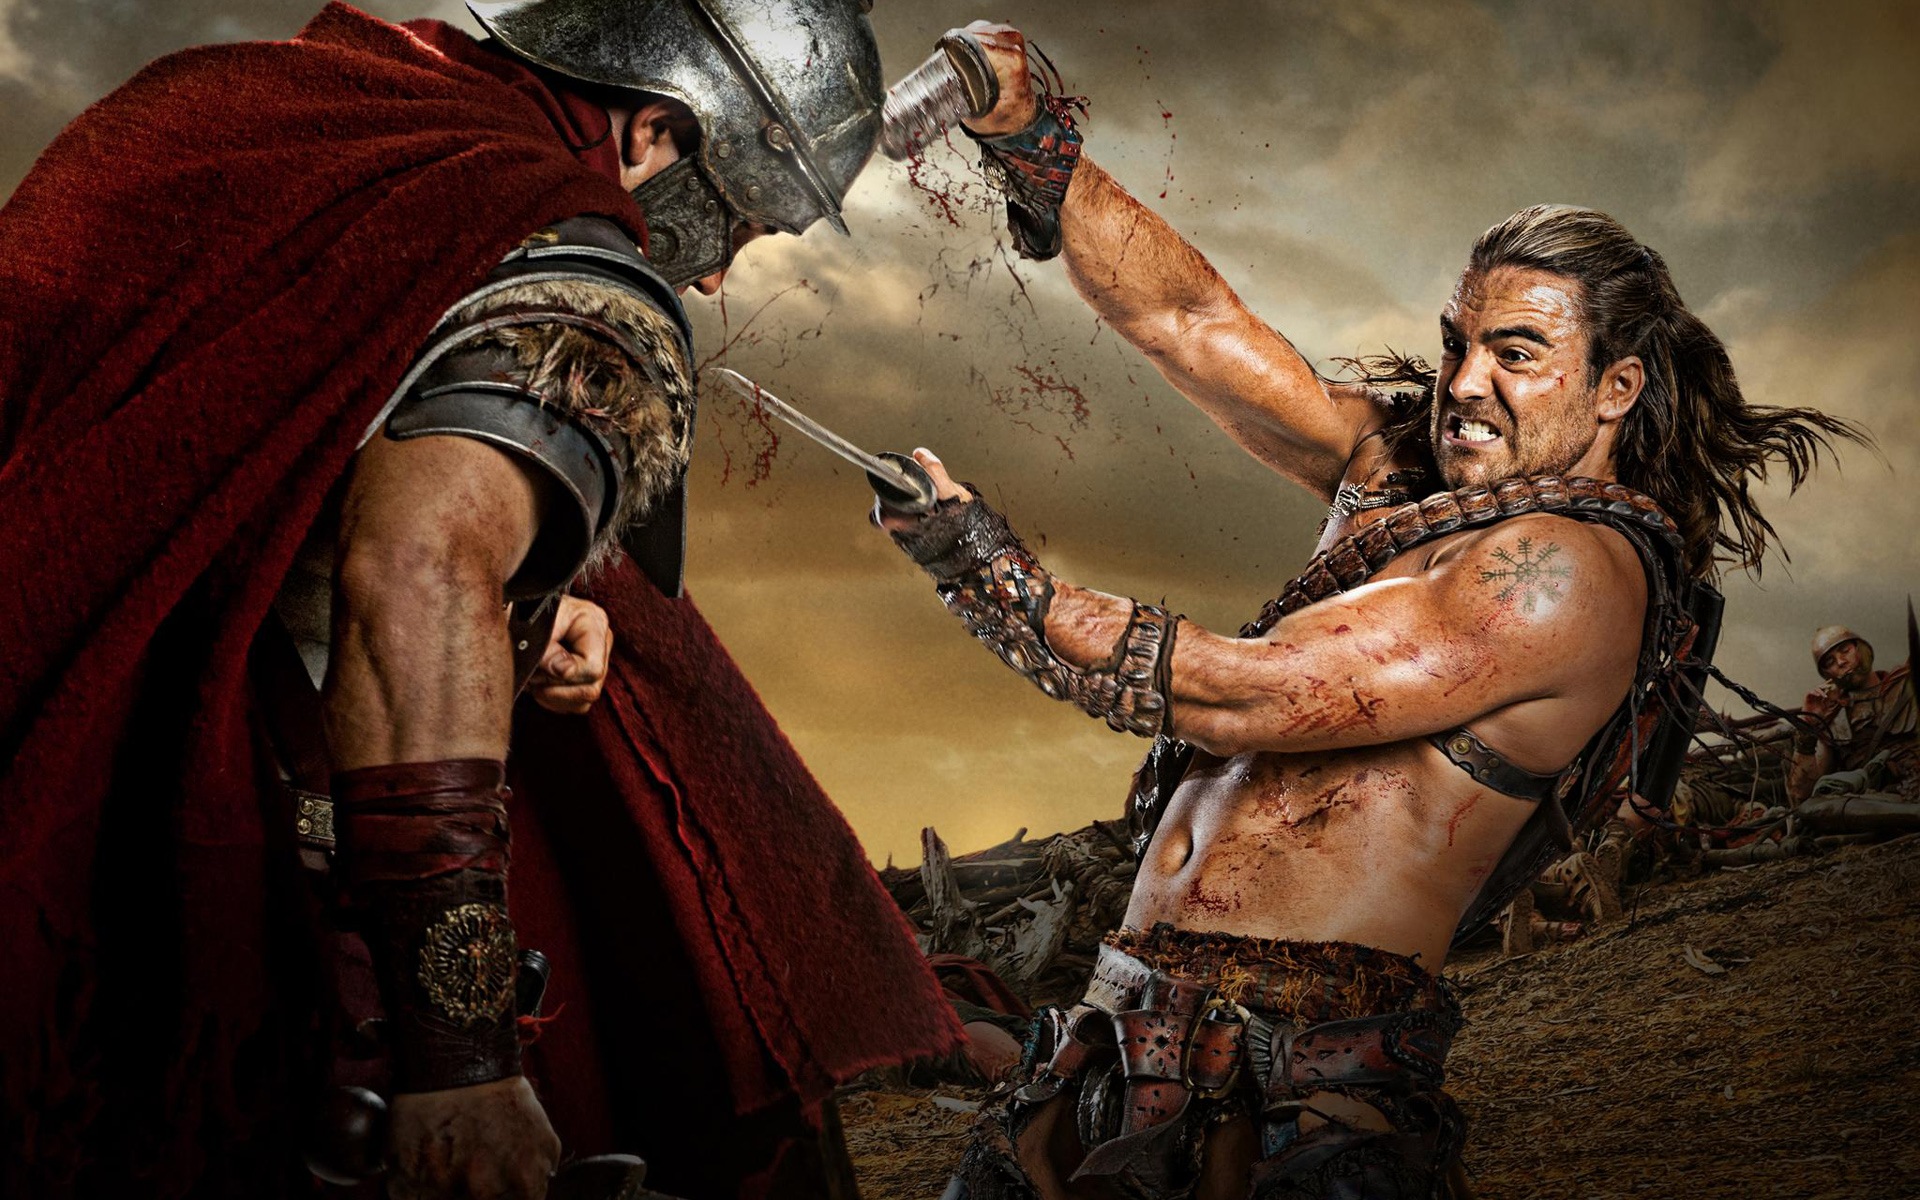 Spartacus: War of the Damned HD Wallpaper #5 - 1920x1200